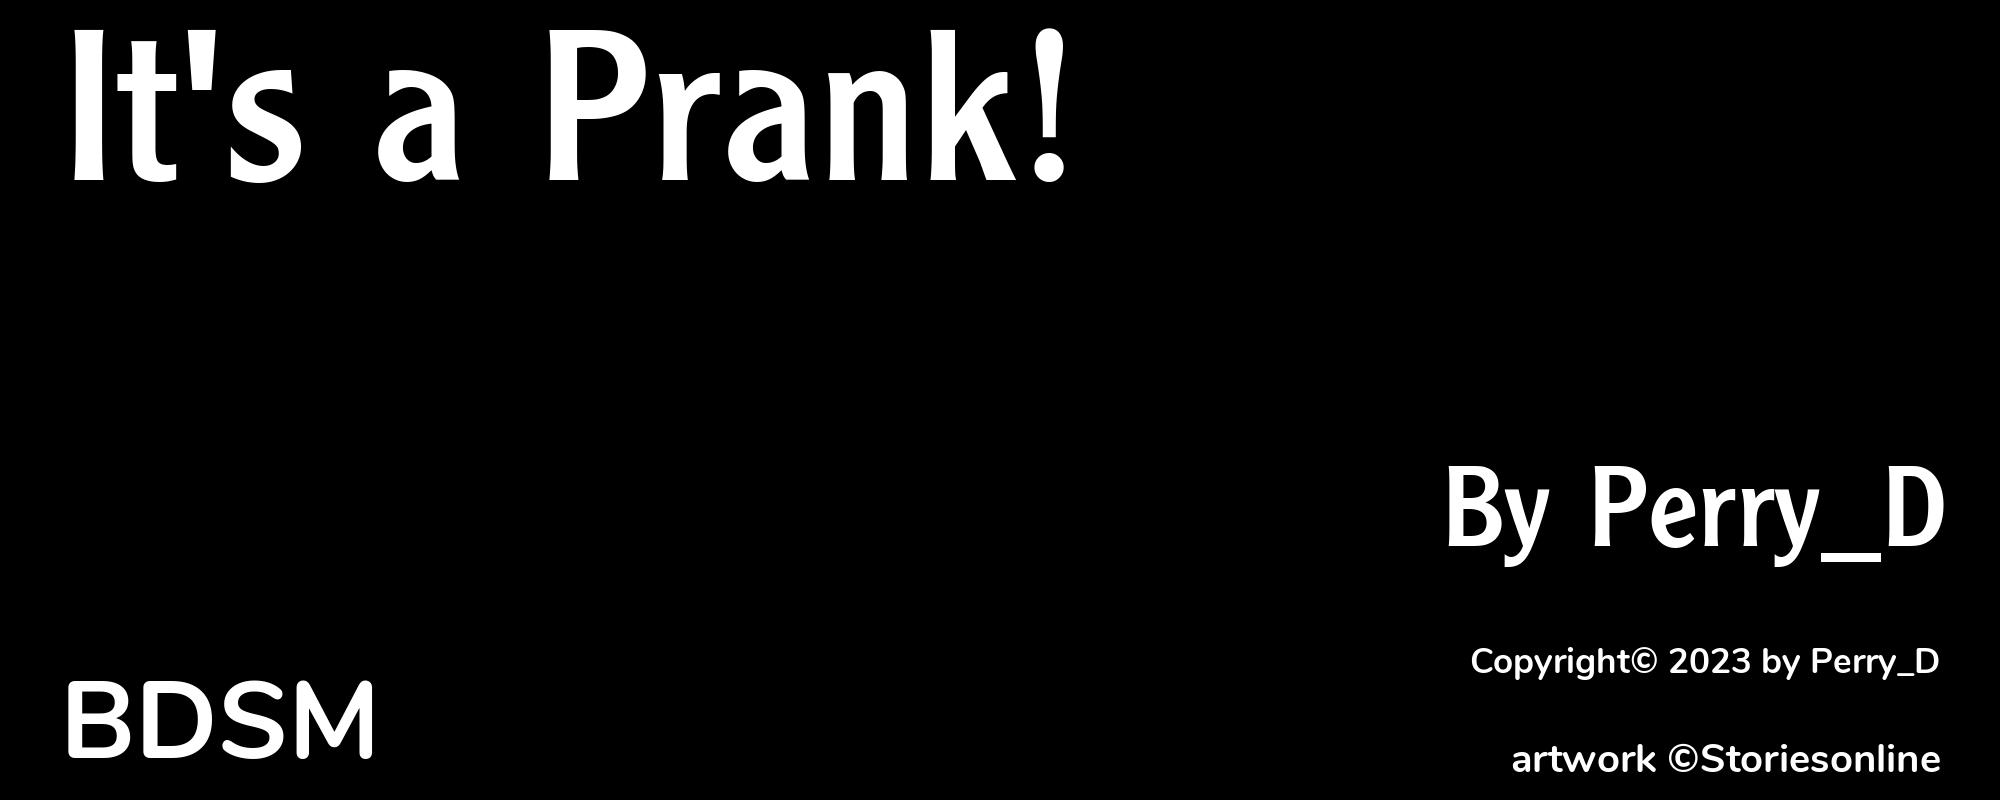 It's a Prank! - Cover